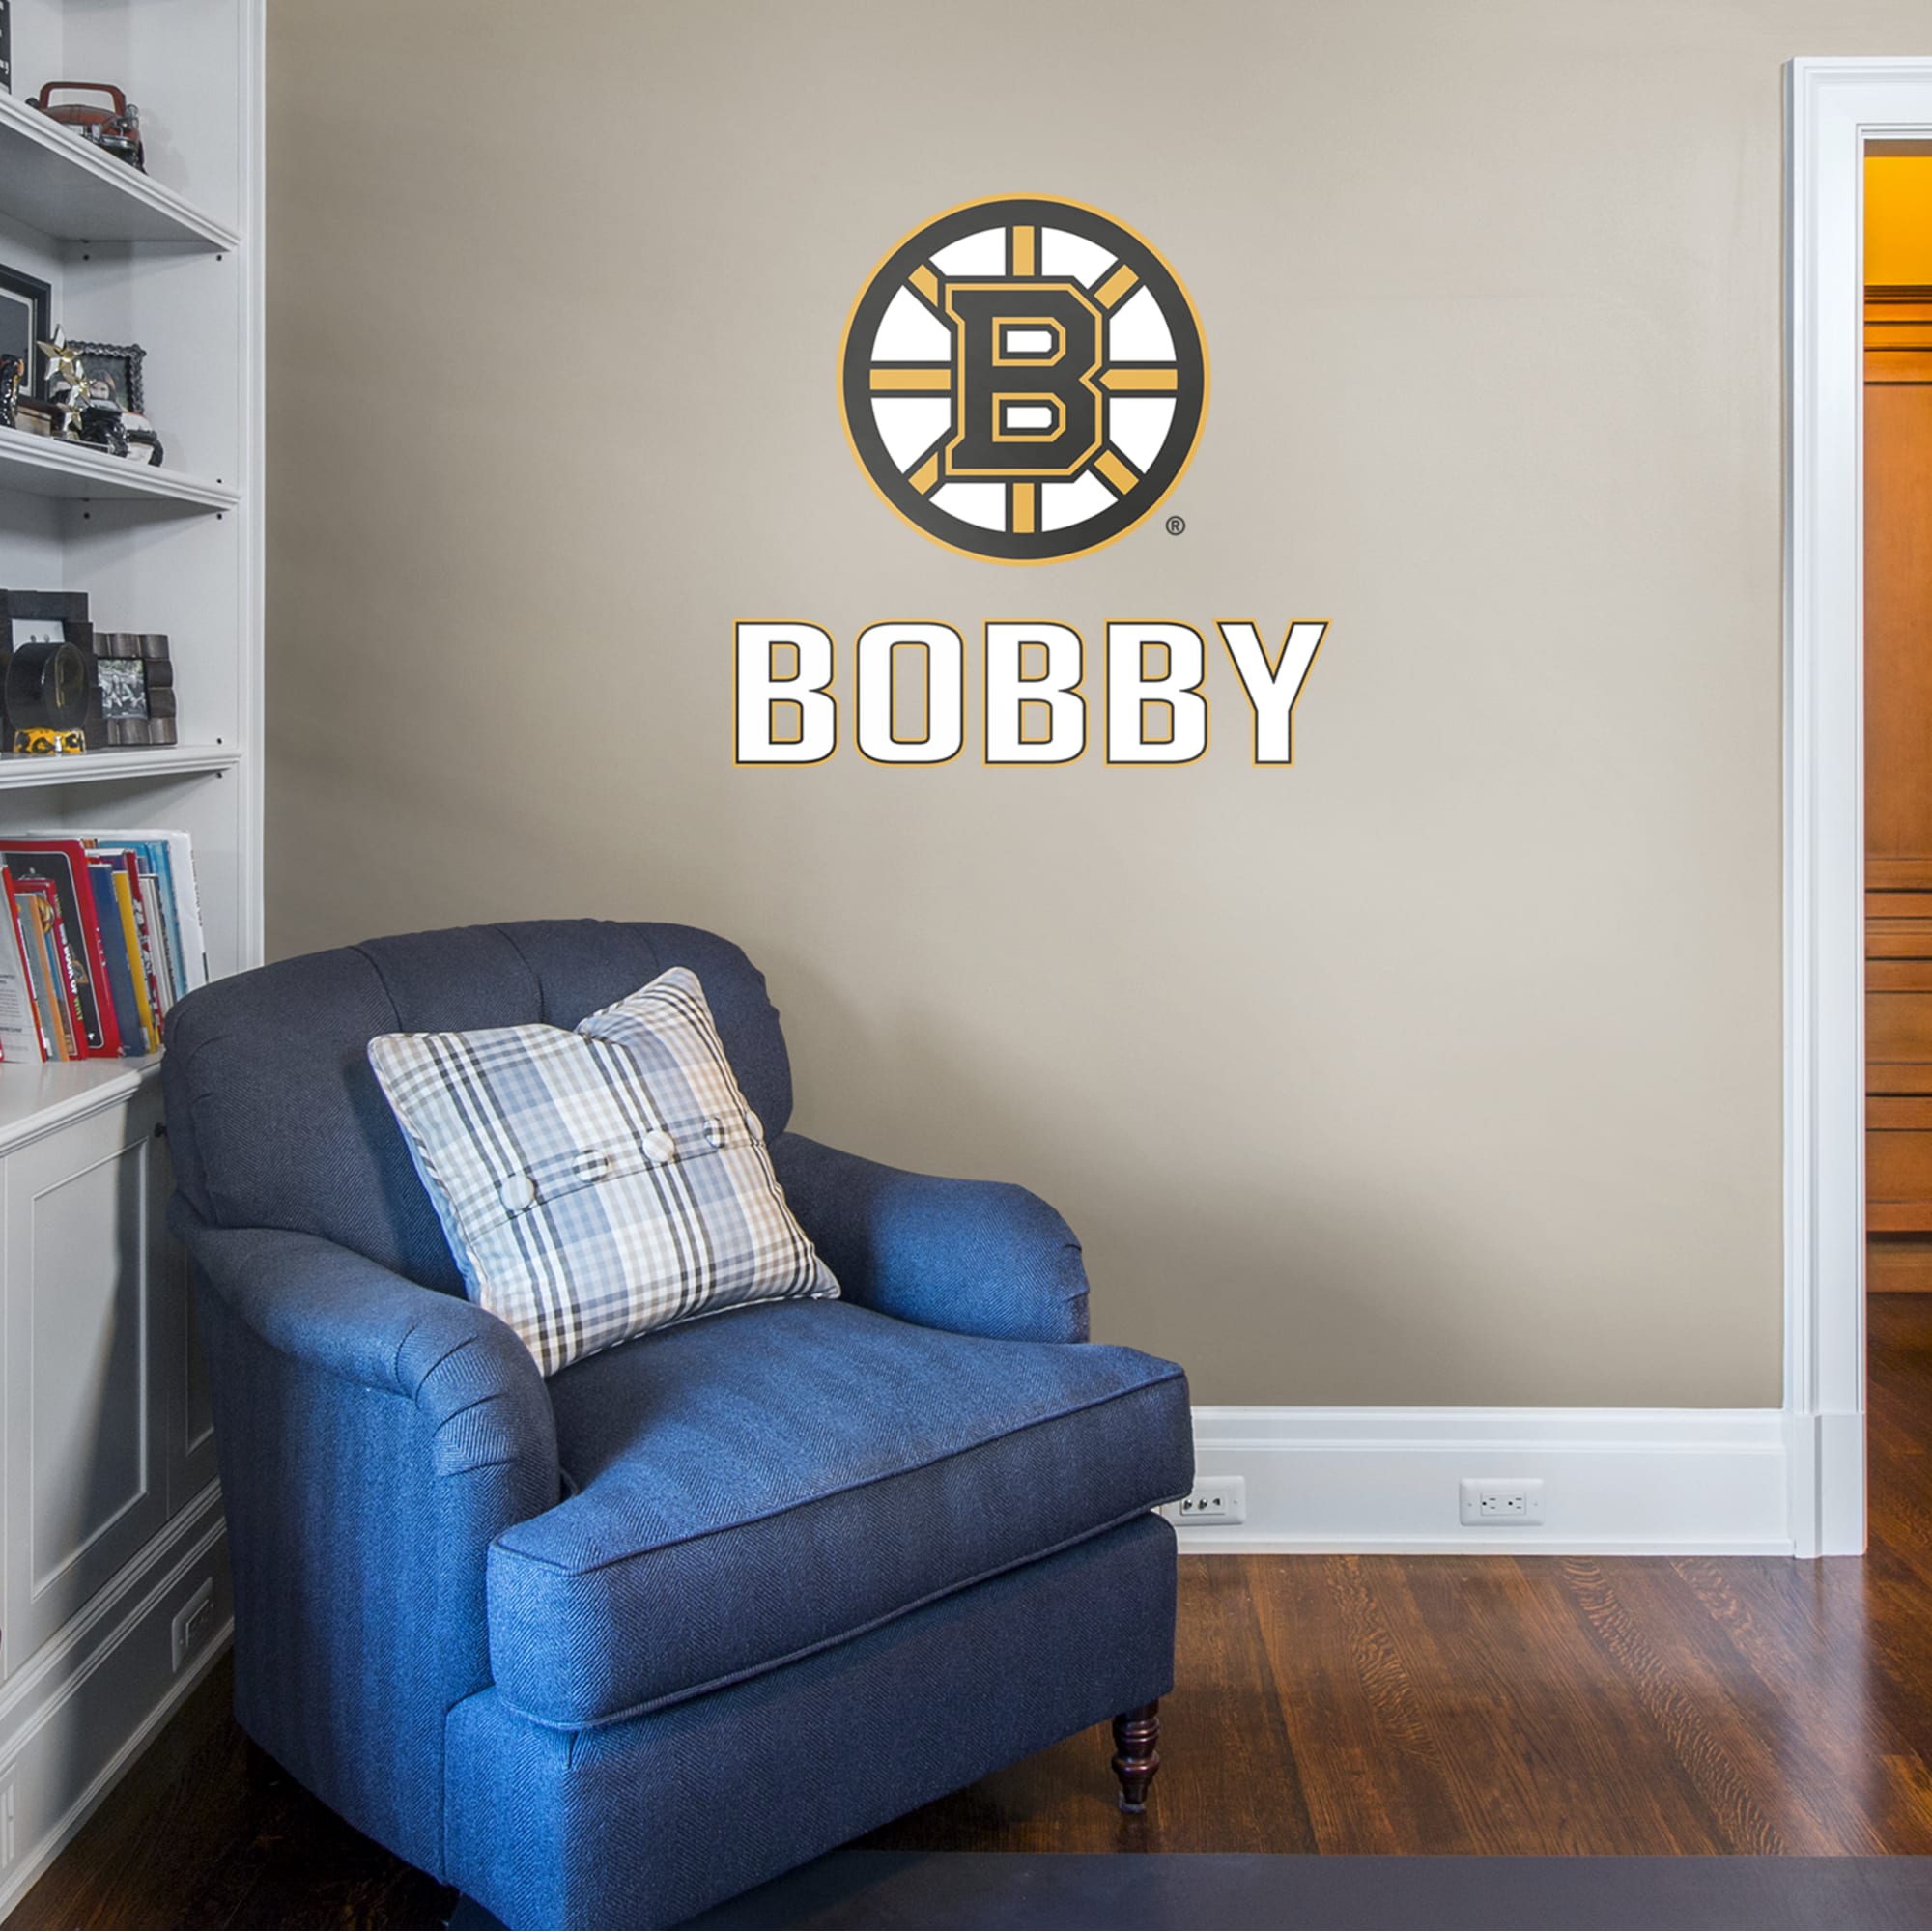 Boston Bruins: Stacked Personalized Name - Officially Licensed NHL Transfer Decal in White (39.5"W x 52"H) by Fathead | Vinyl